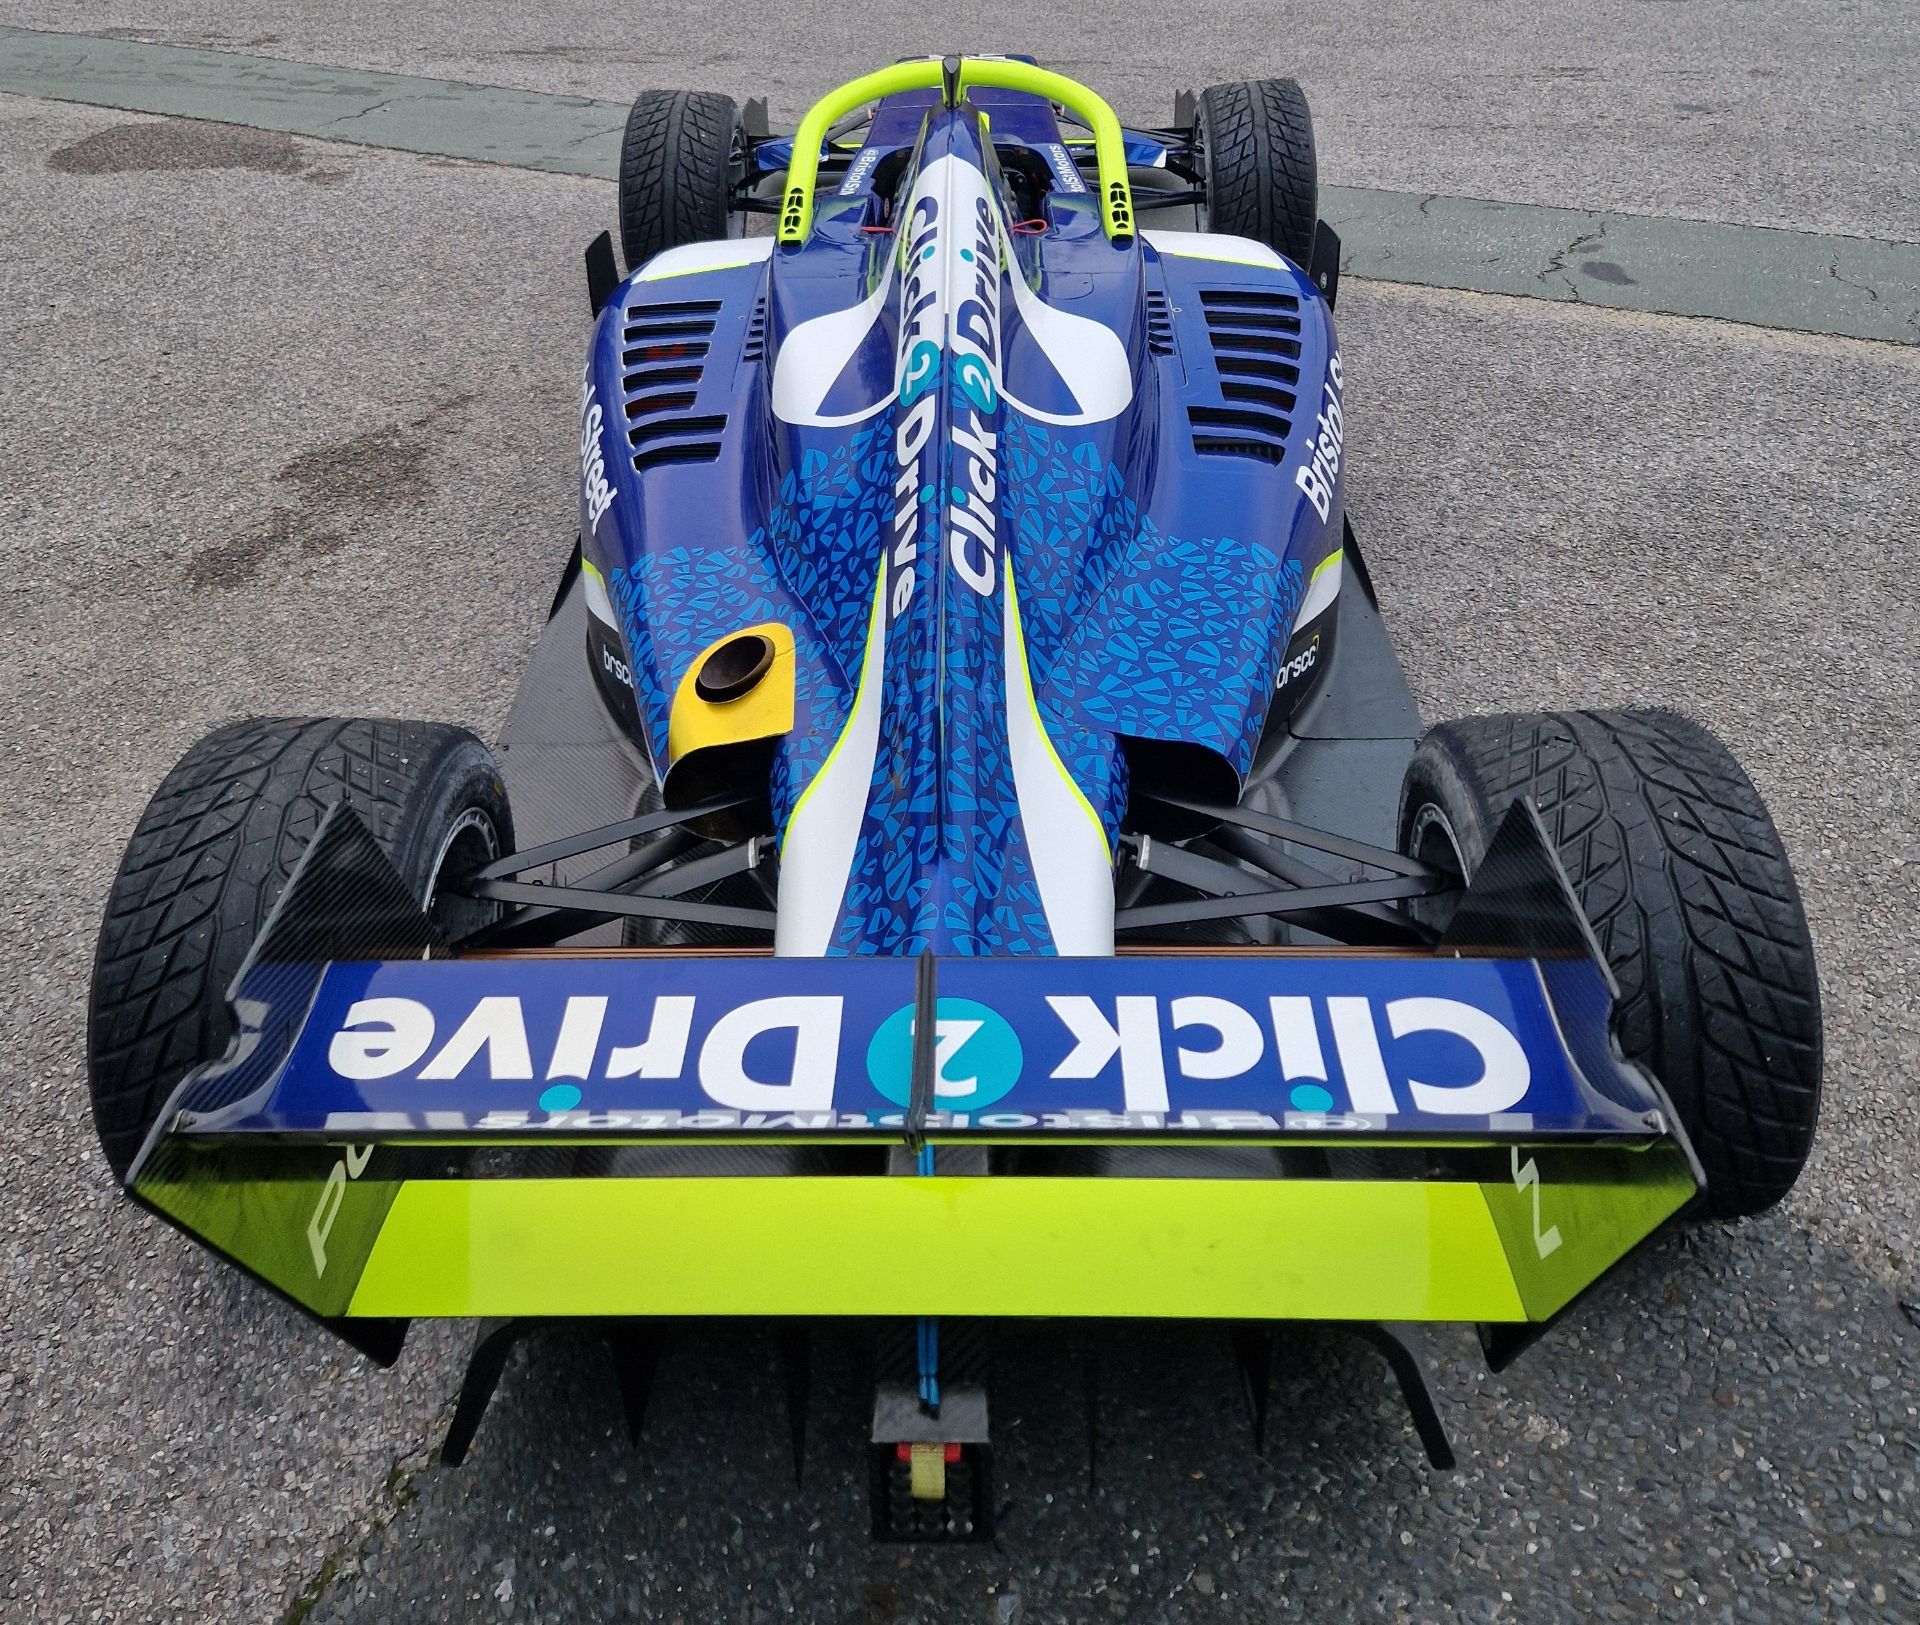 One TATUUS F3 T-318 Alfa Romeo Race Car Chassis No. 043 (2019) Finished in Bristol Street Motors - Image 4 of 10